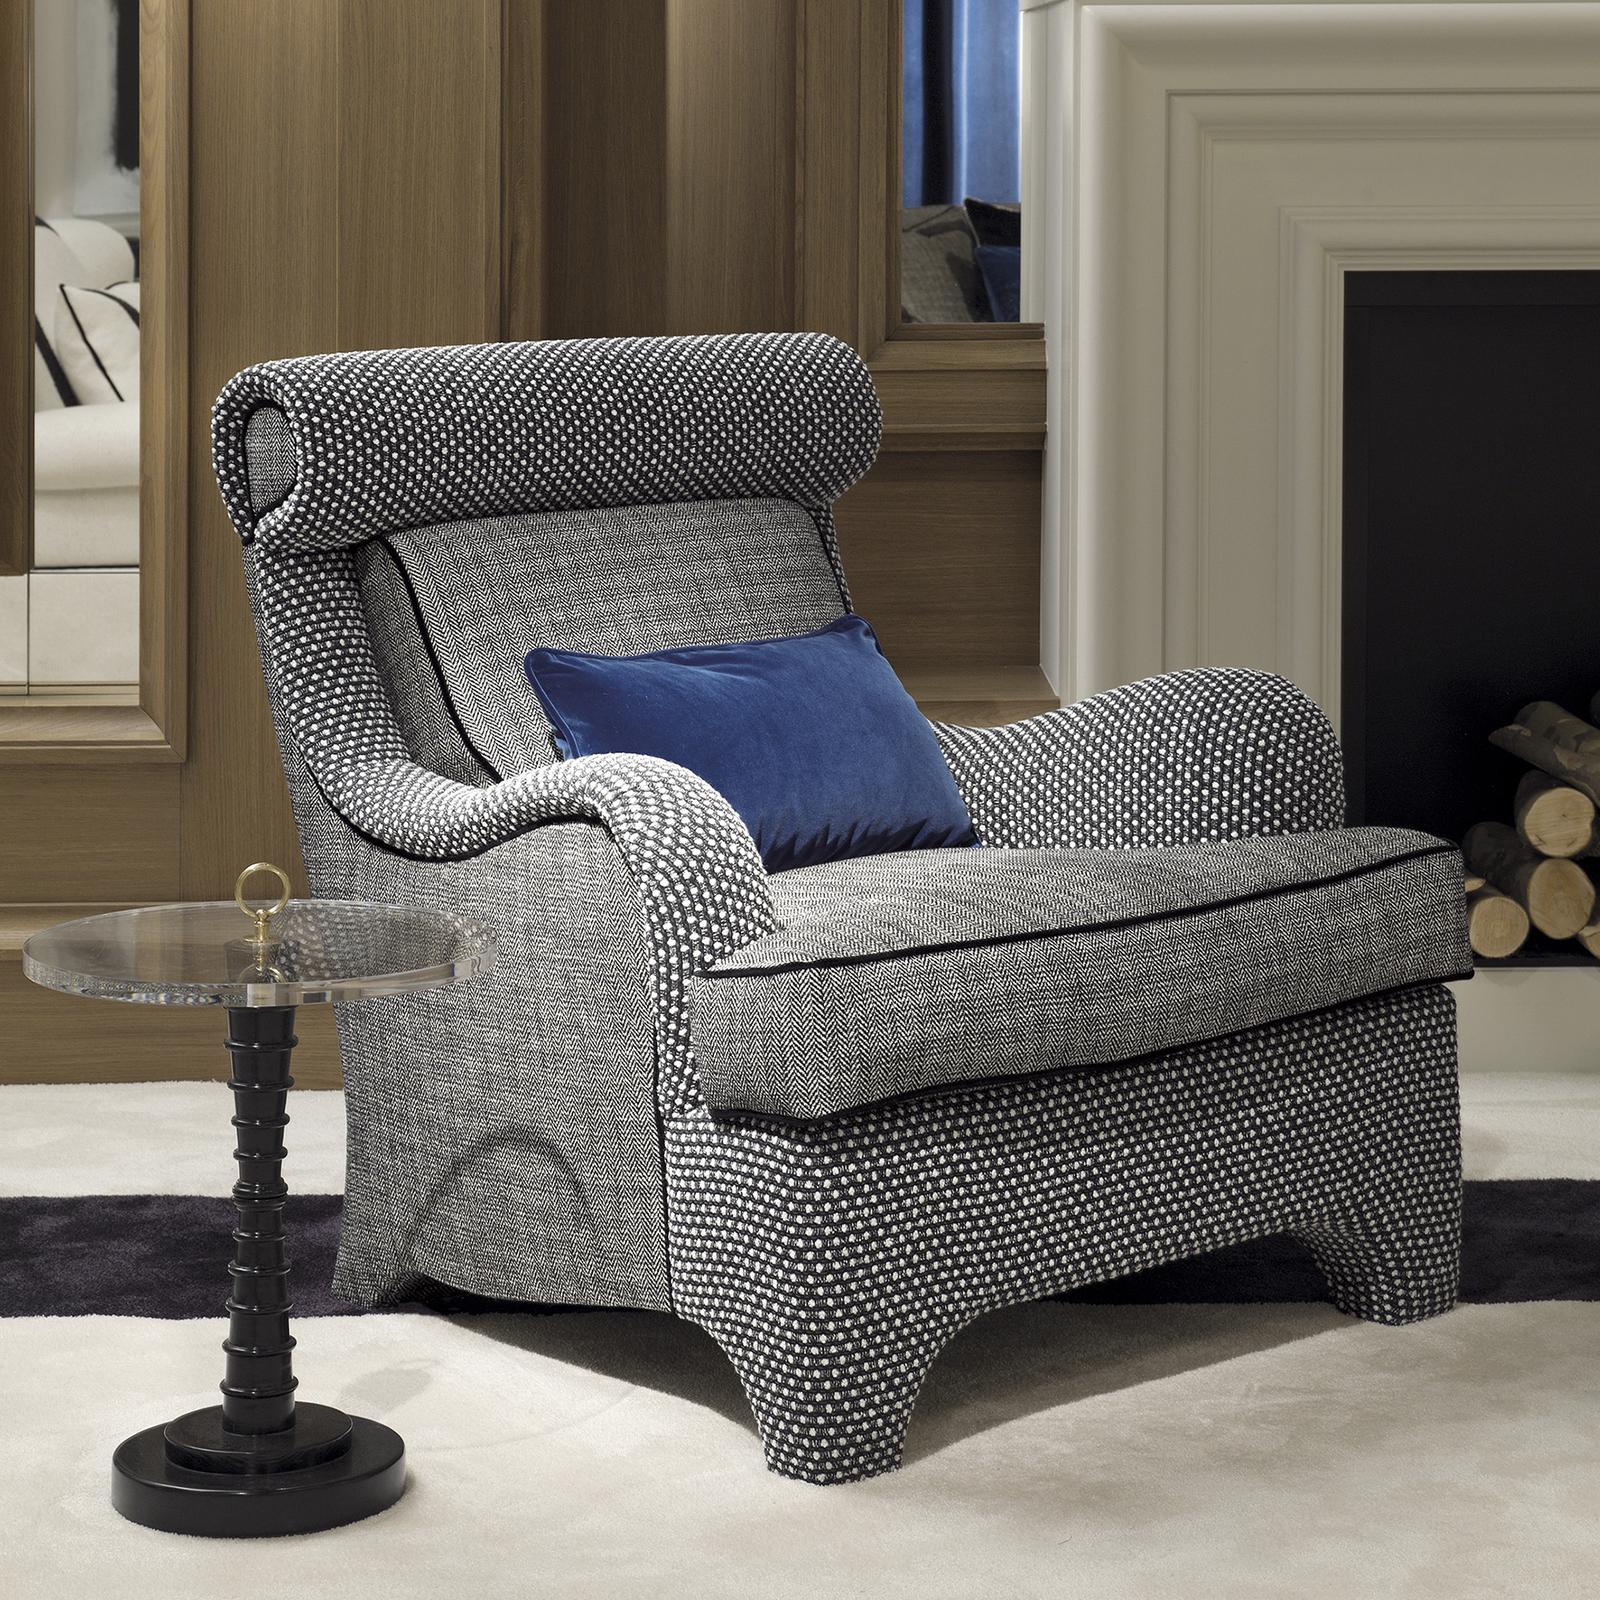 A harmonious combination of refined design and cozy volumes, this armchair is a unique addition to a living room or study. Its sinuous silhouette in solid wood is covered with a plush seat with curved armrests and a back reclined to guarantee